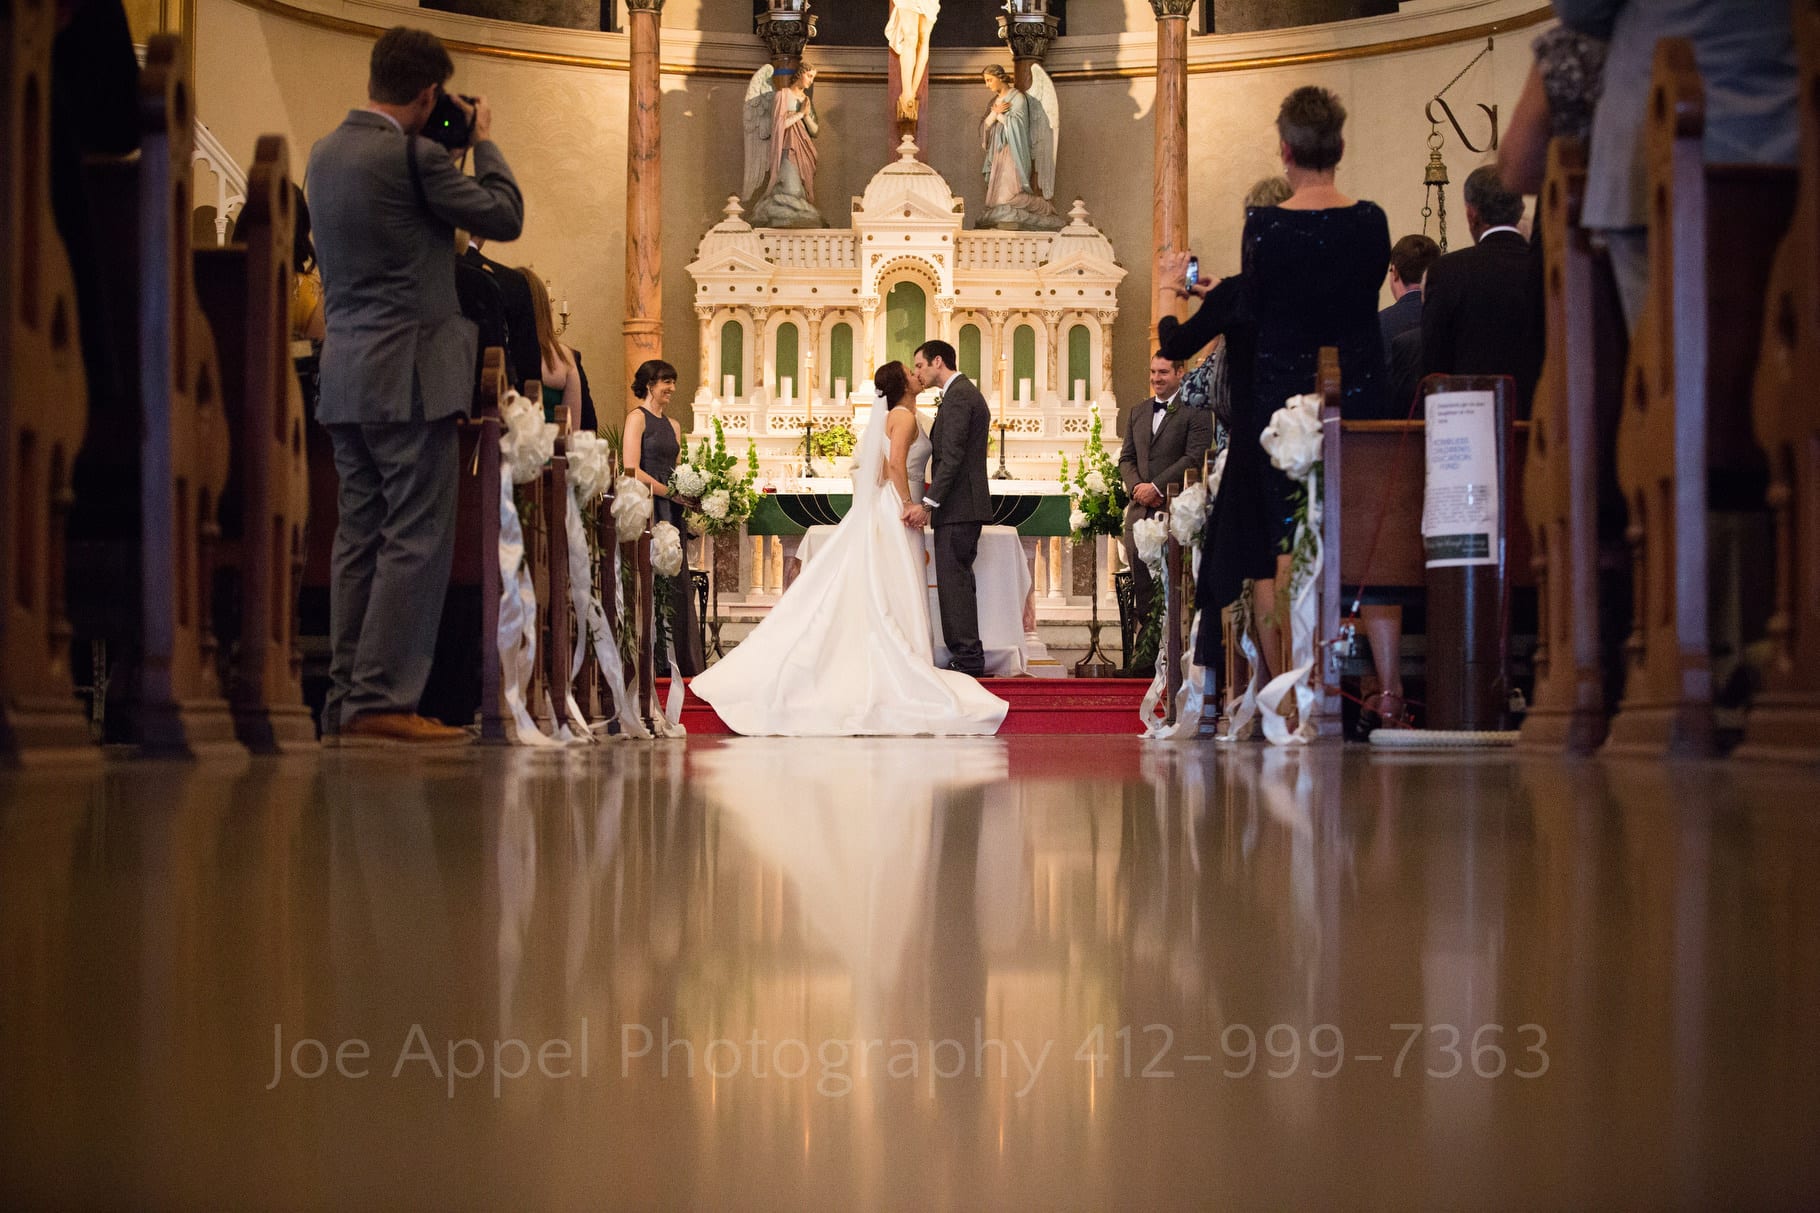 A bride and groom are reflected in the floor of St. Stanislaus church as they kiss in front of the altar during their wedding.